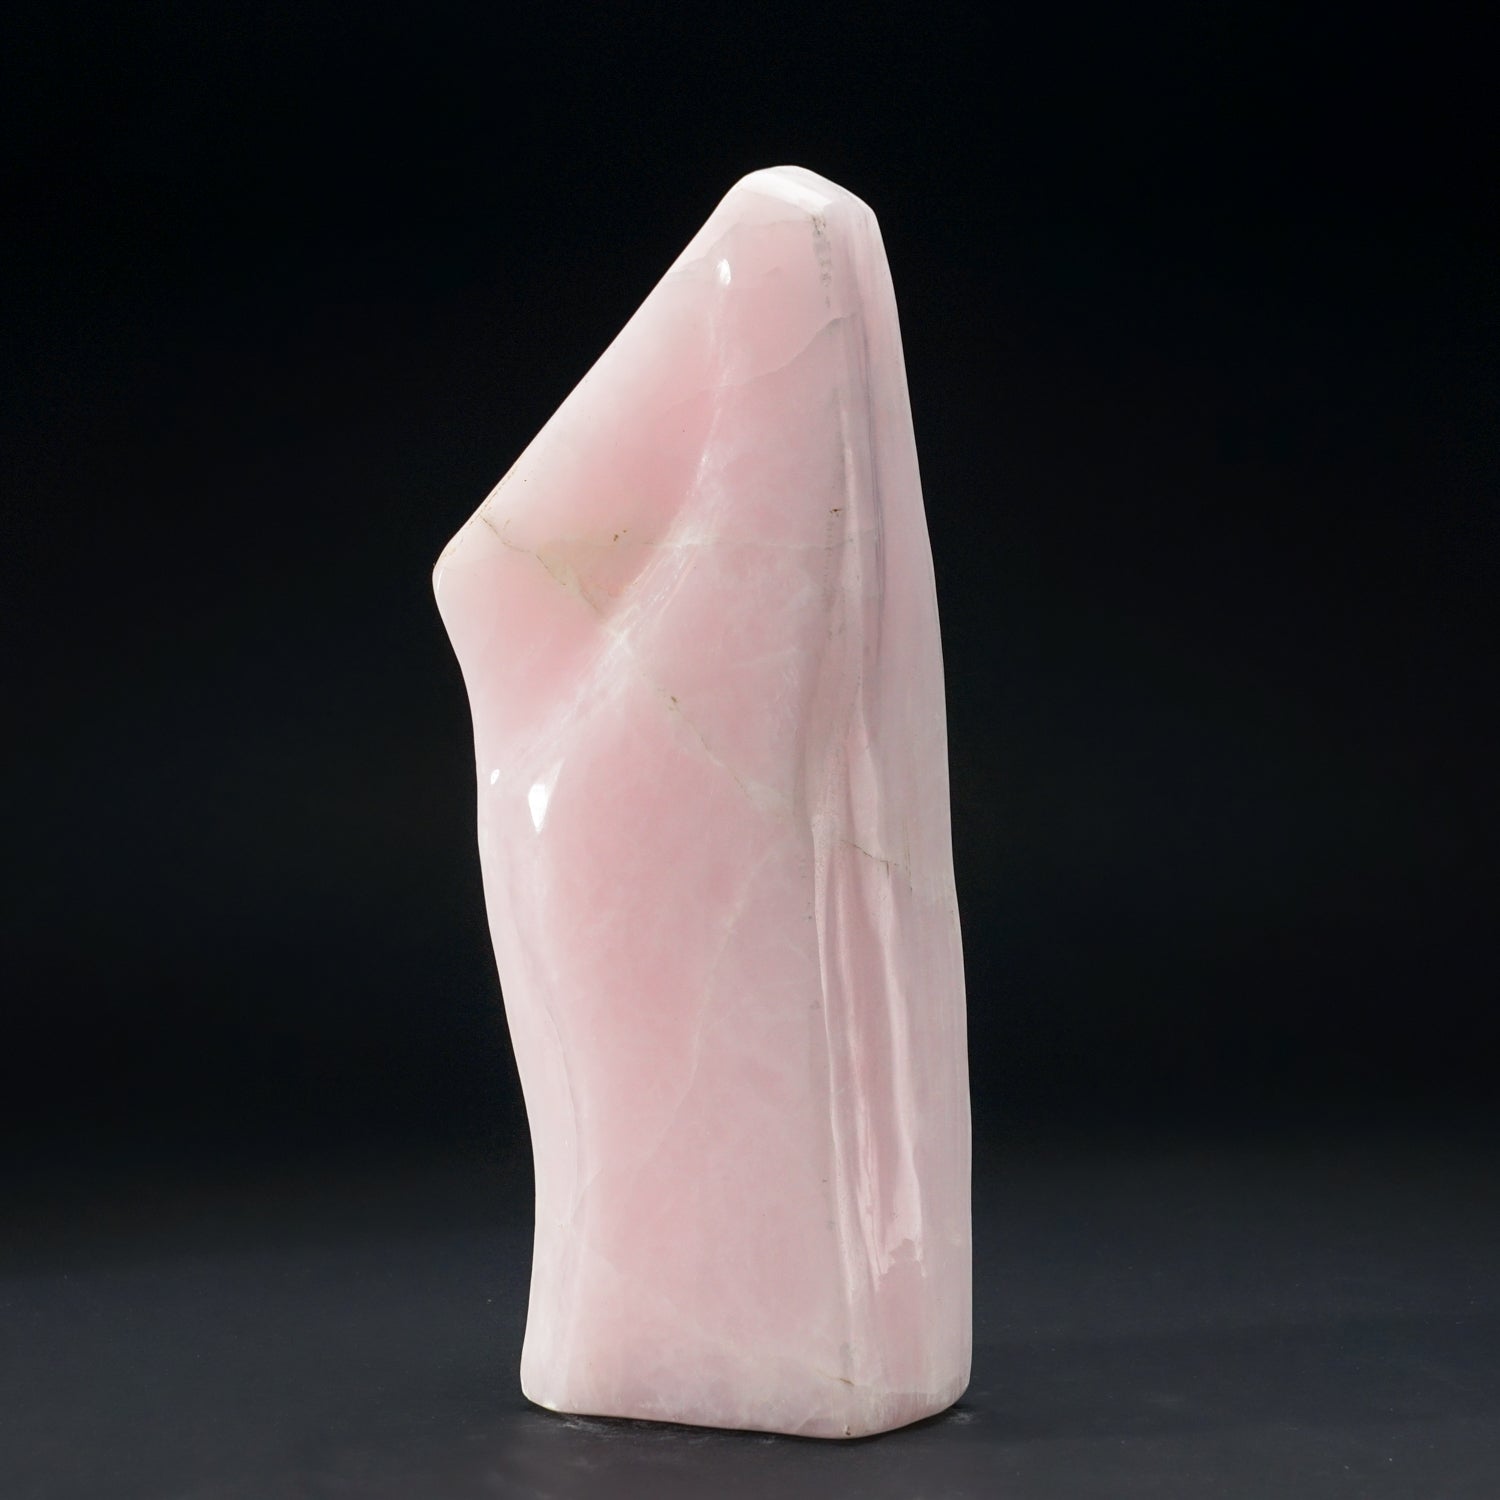 Polished Pink Mangano Calcite from Pakistan (12.6 lbs)